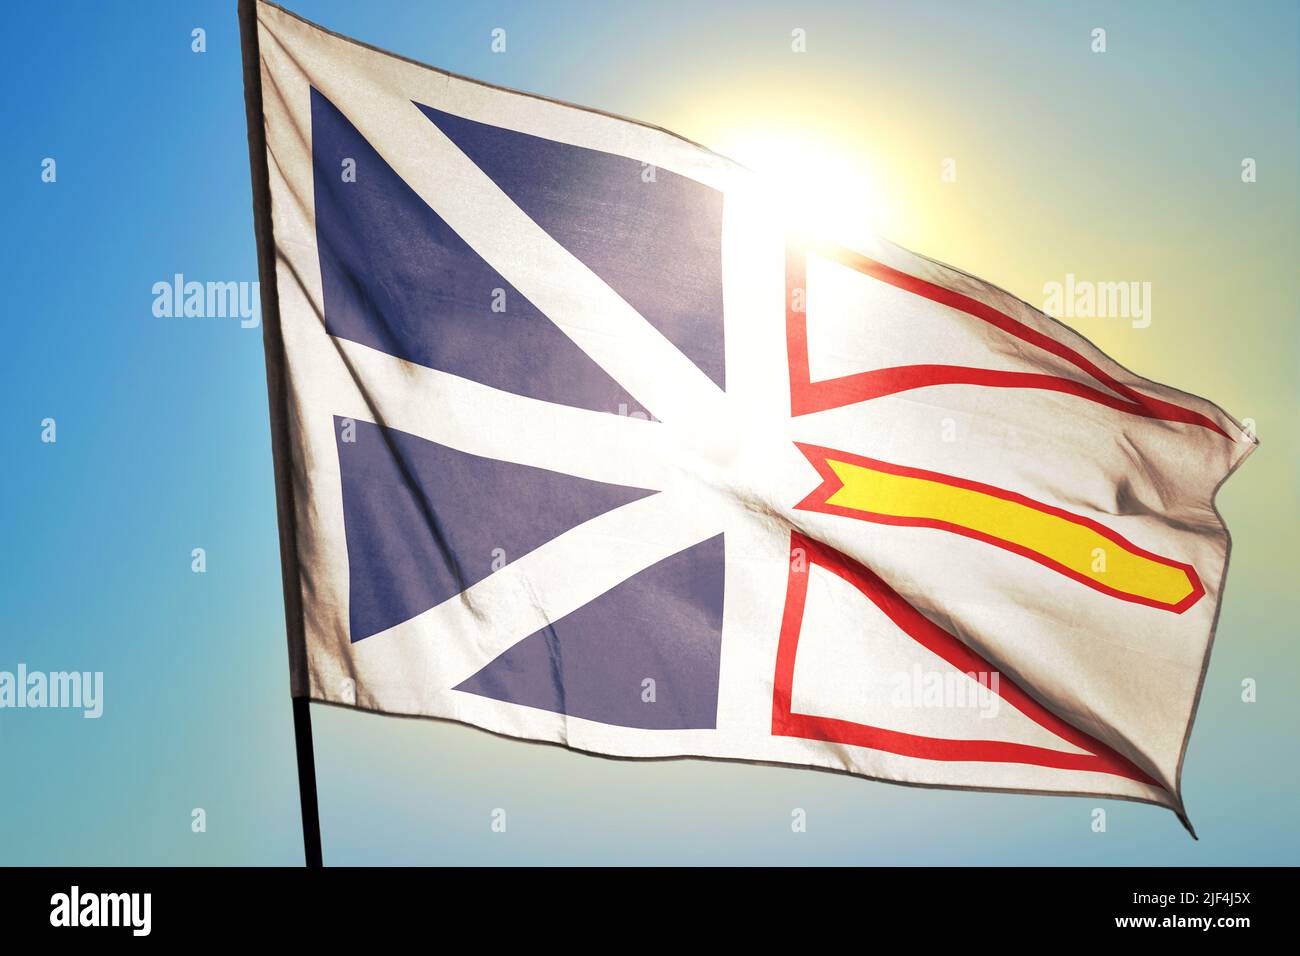 Newfoundland and Labrador province of Canada flag waving on the wind Stock Photo